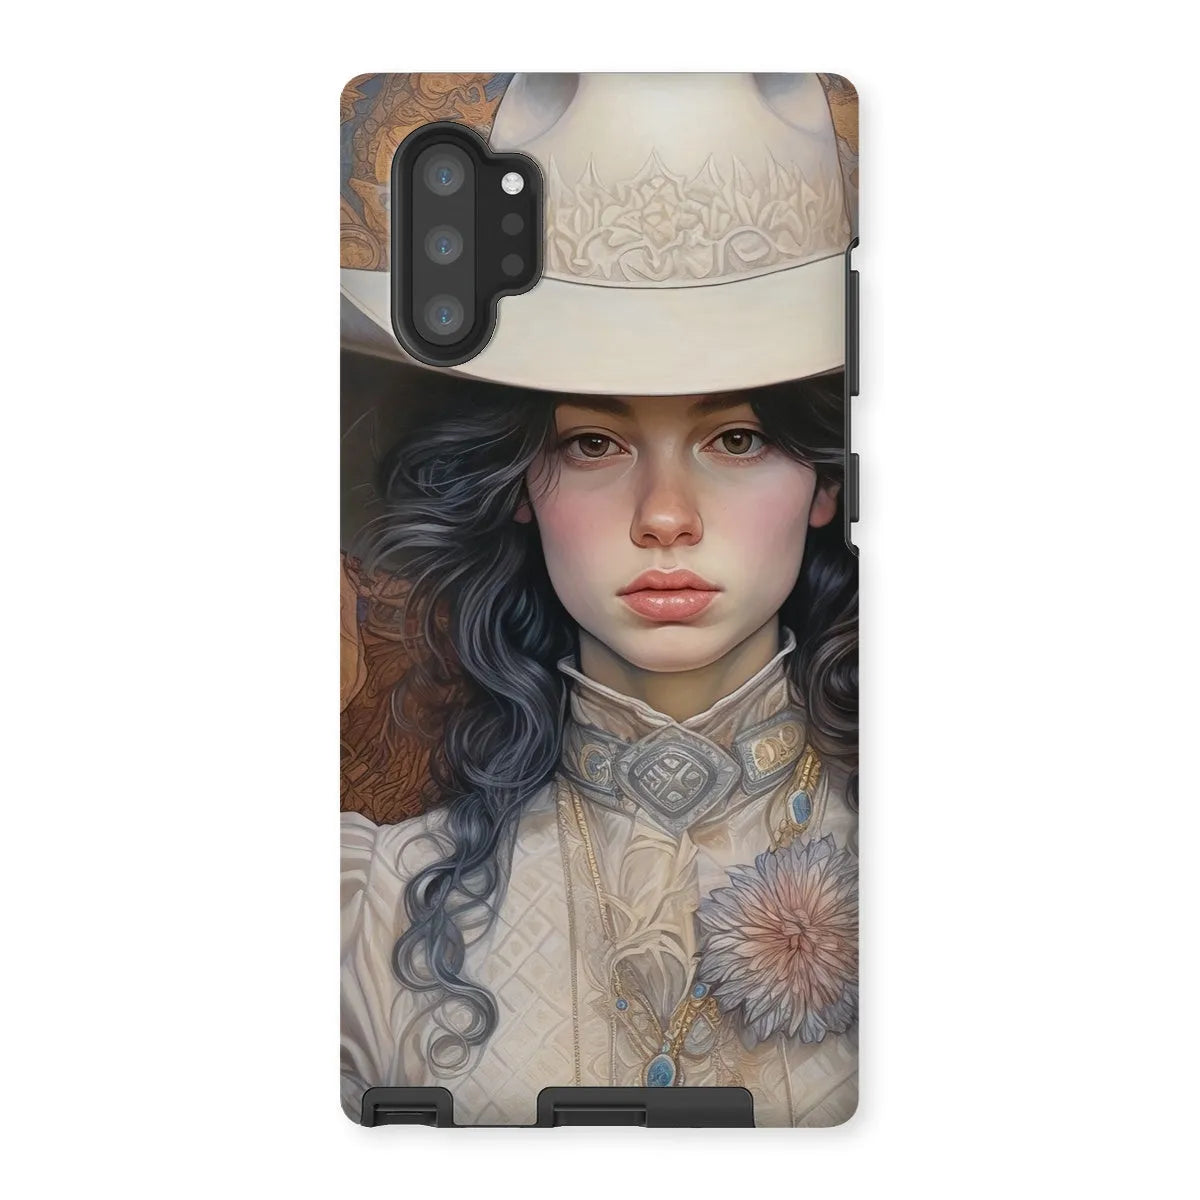 Helena The Lesbian Cowgirl - Sapphic Art Phone Case - Samsung Galaxy Note 10p / Matte - Mobile Phone Cases - Aesthetic